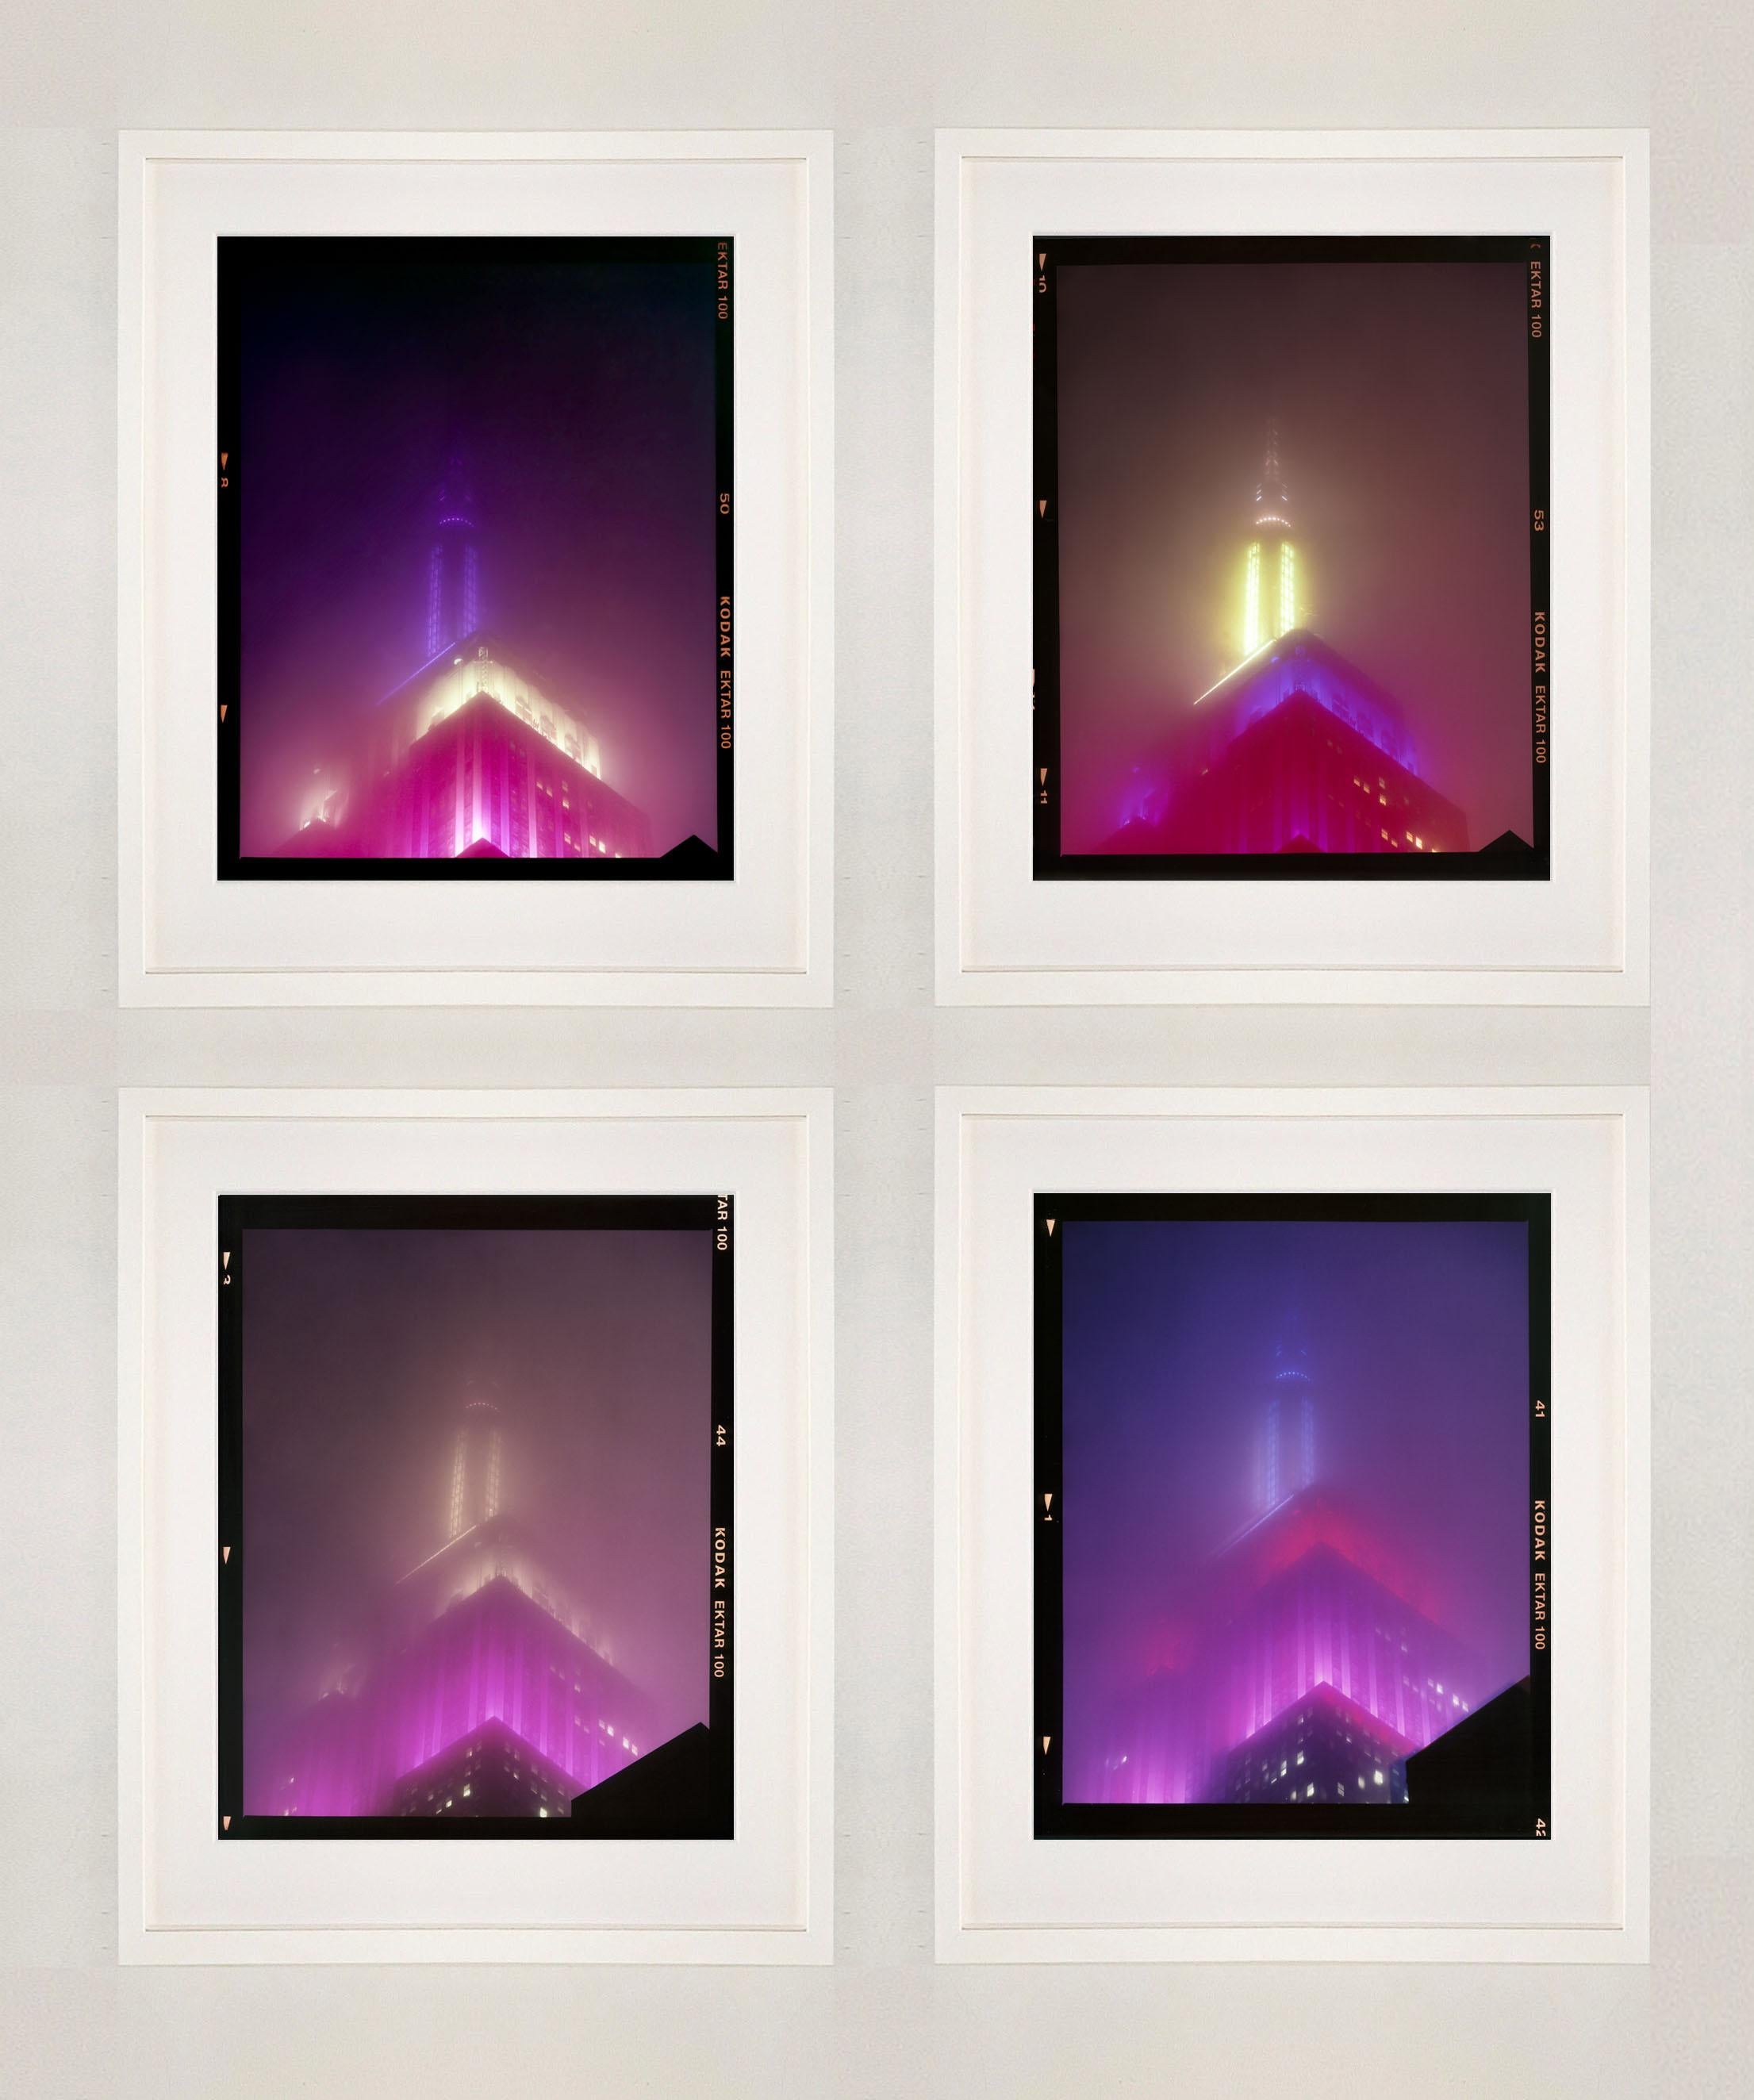 'NOMAD VII (Film Rebate)', New York. Richard Heeps has photographed the iconic Empire State building in the mist. The NOMAD sequence of photographs capture the art deco architecture illuminated by changing colours, and is part of Richard's street